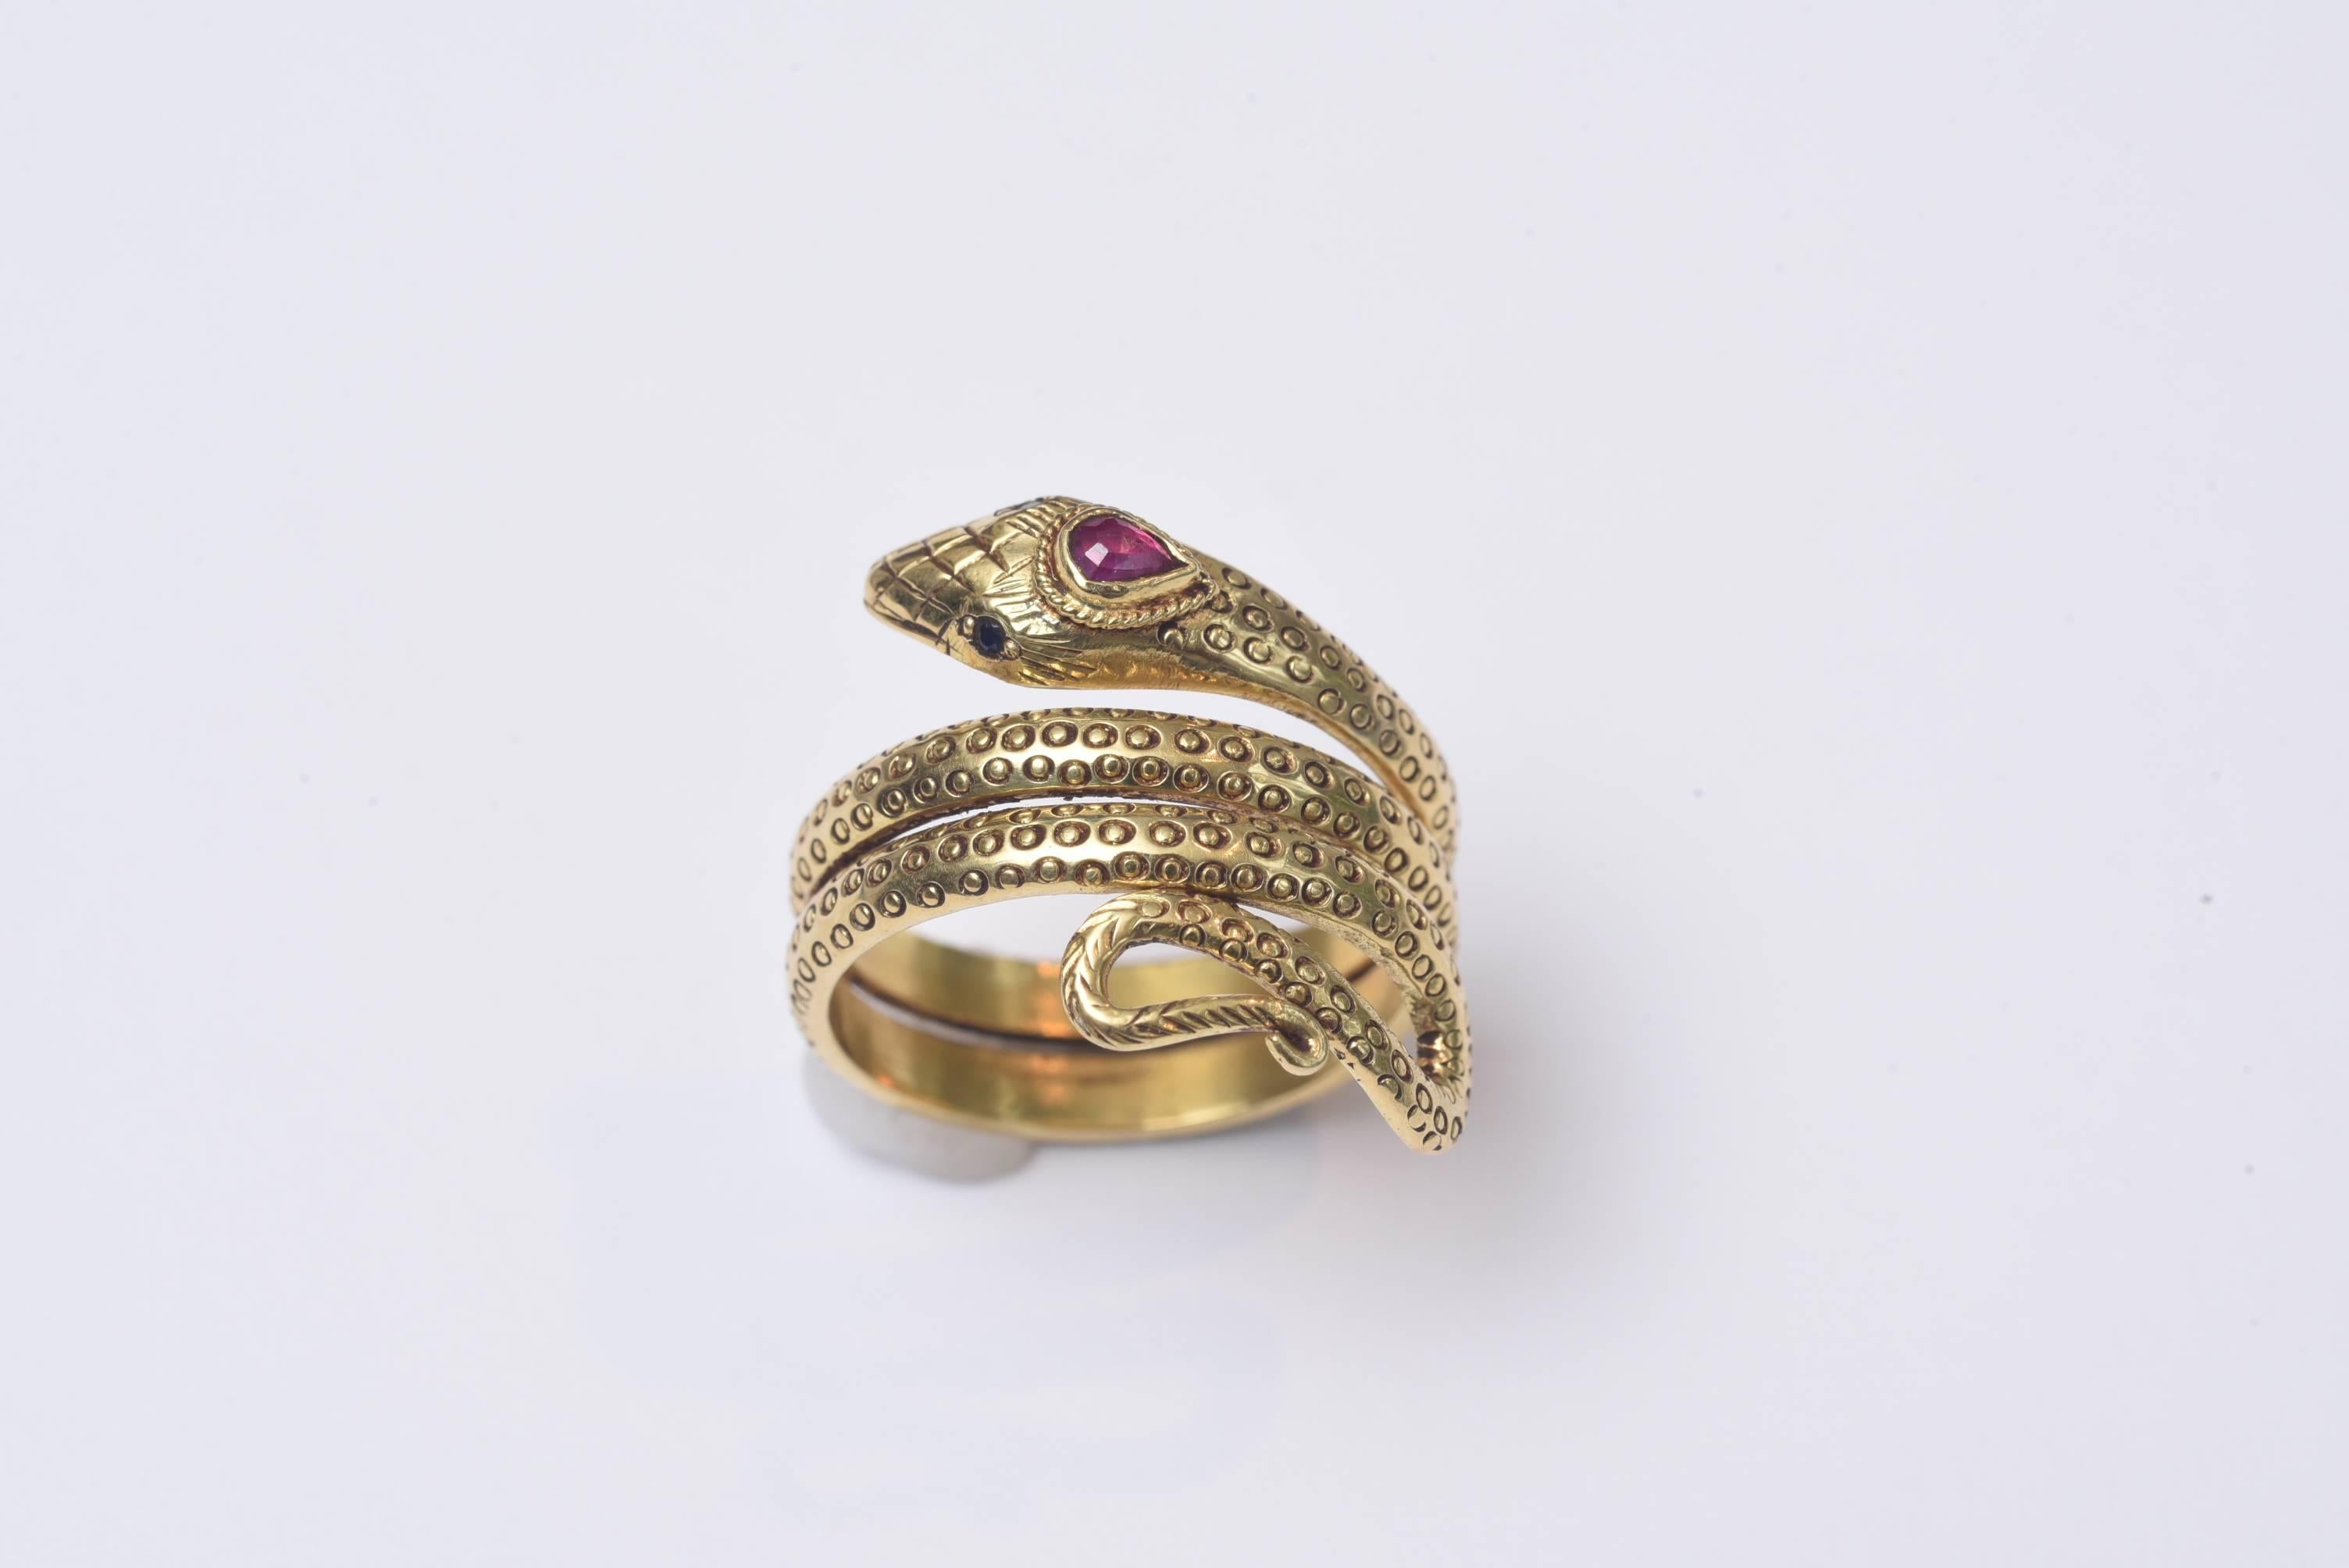 Finely tooled 18K gold snake ring with faceted blue sapphire eyes and a faceted pear-shaped ruby third eye.  Some flexibility to sizing, as is it is a size 7 3/4.